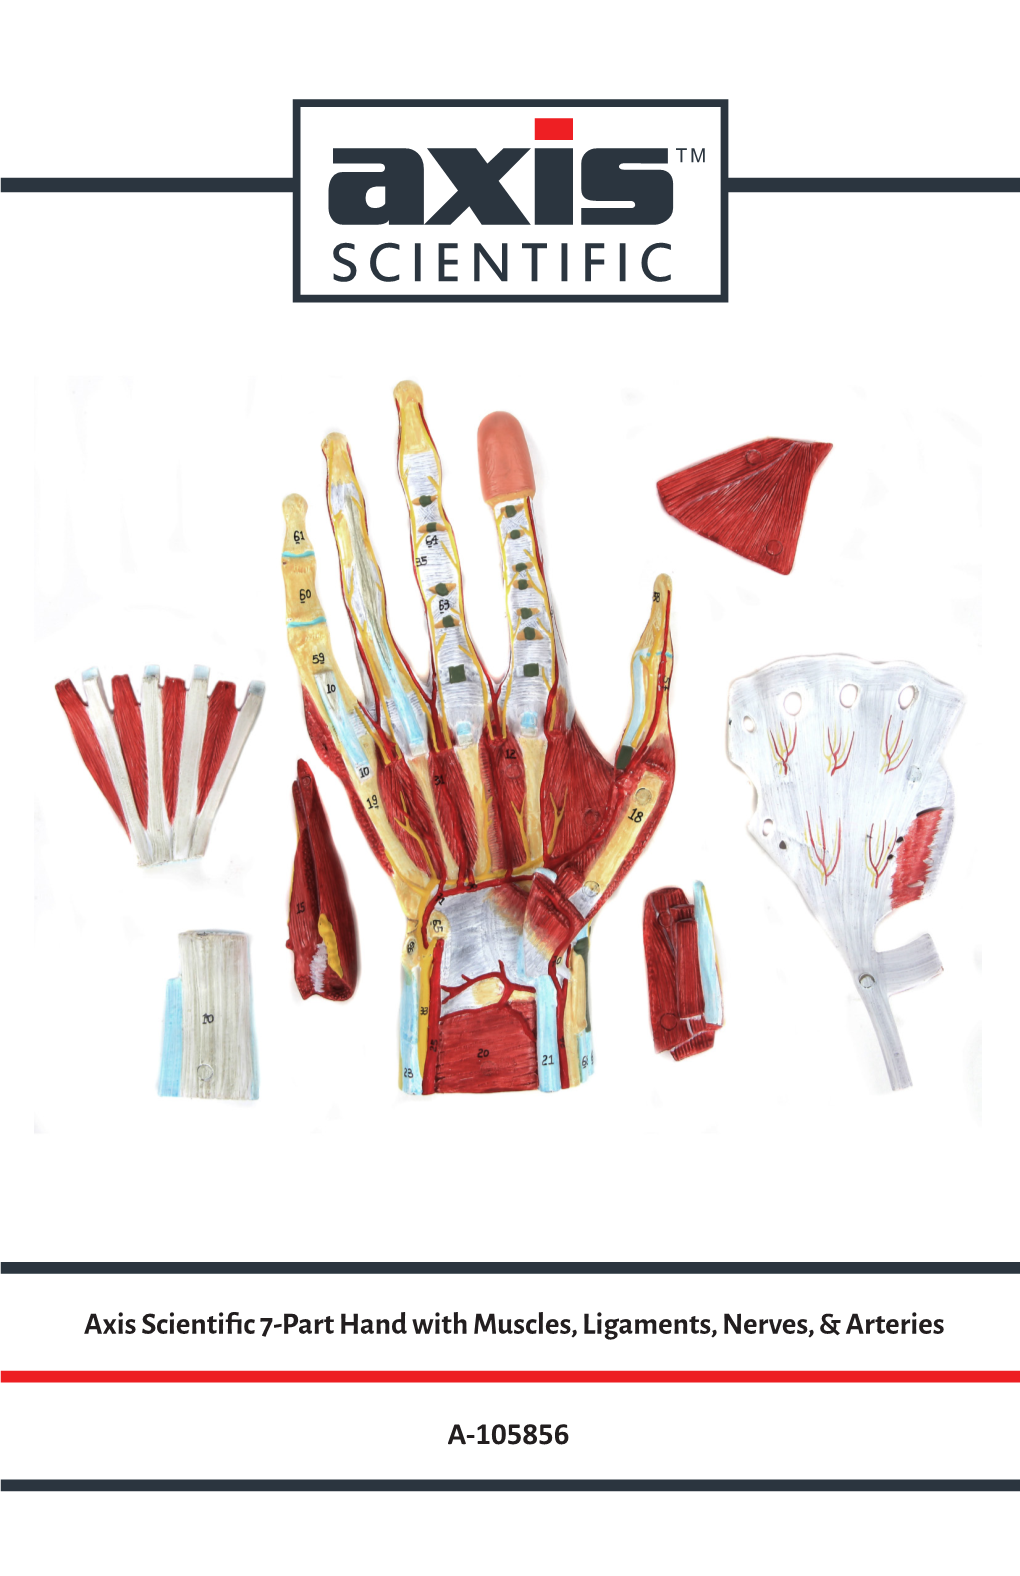 Axis Scientific 7-Part Hand with Muscles, Ligaments, Nerves, & Arteries A-105856